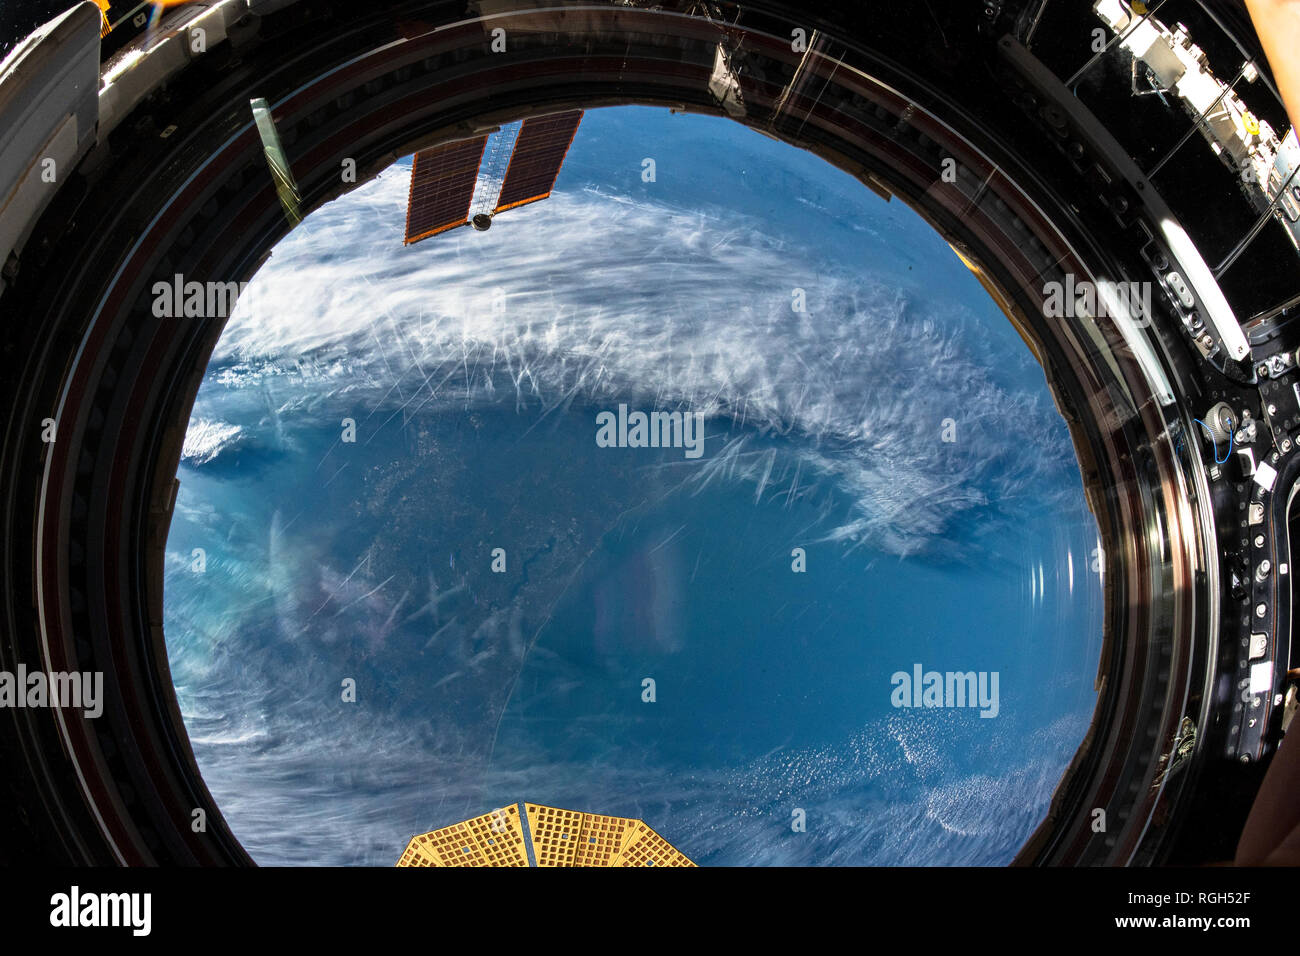 Beautiful planet Earth, our home planet, seen from the International Space Station. Framed images. Images are a  handout from NASA. I have cleaned and Stock Photo